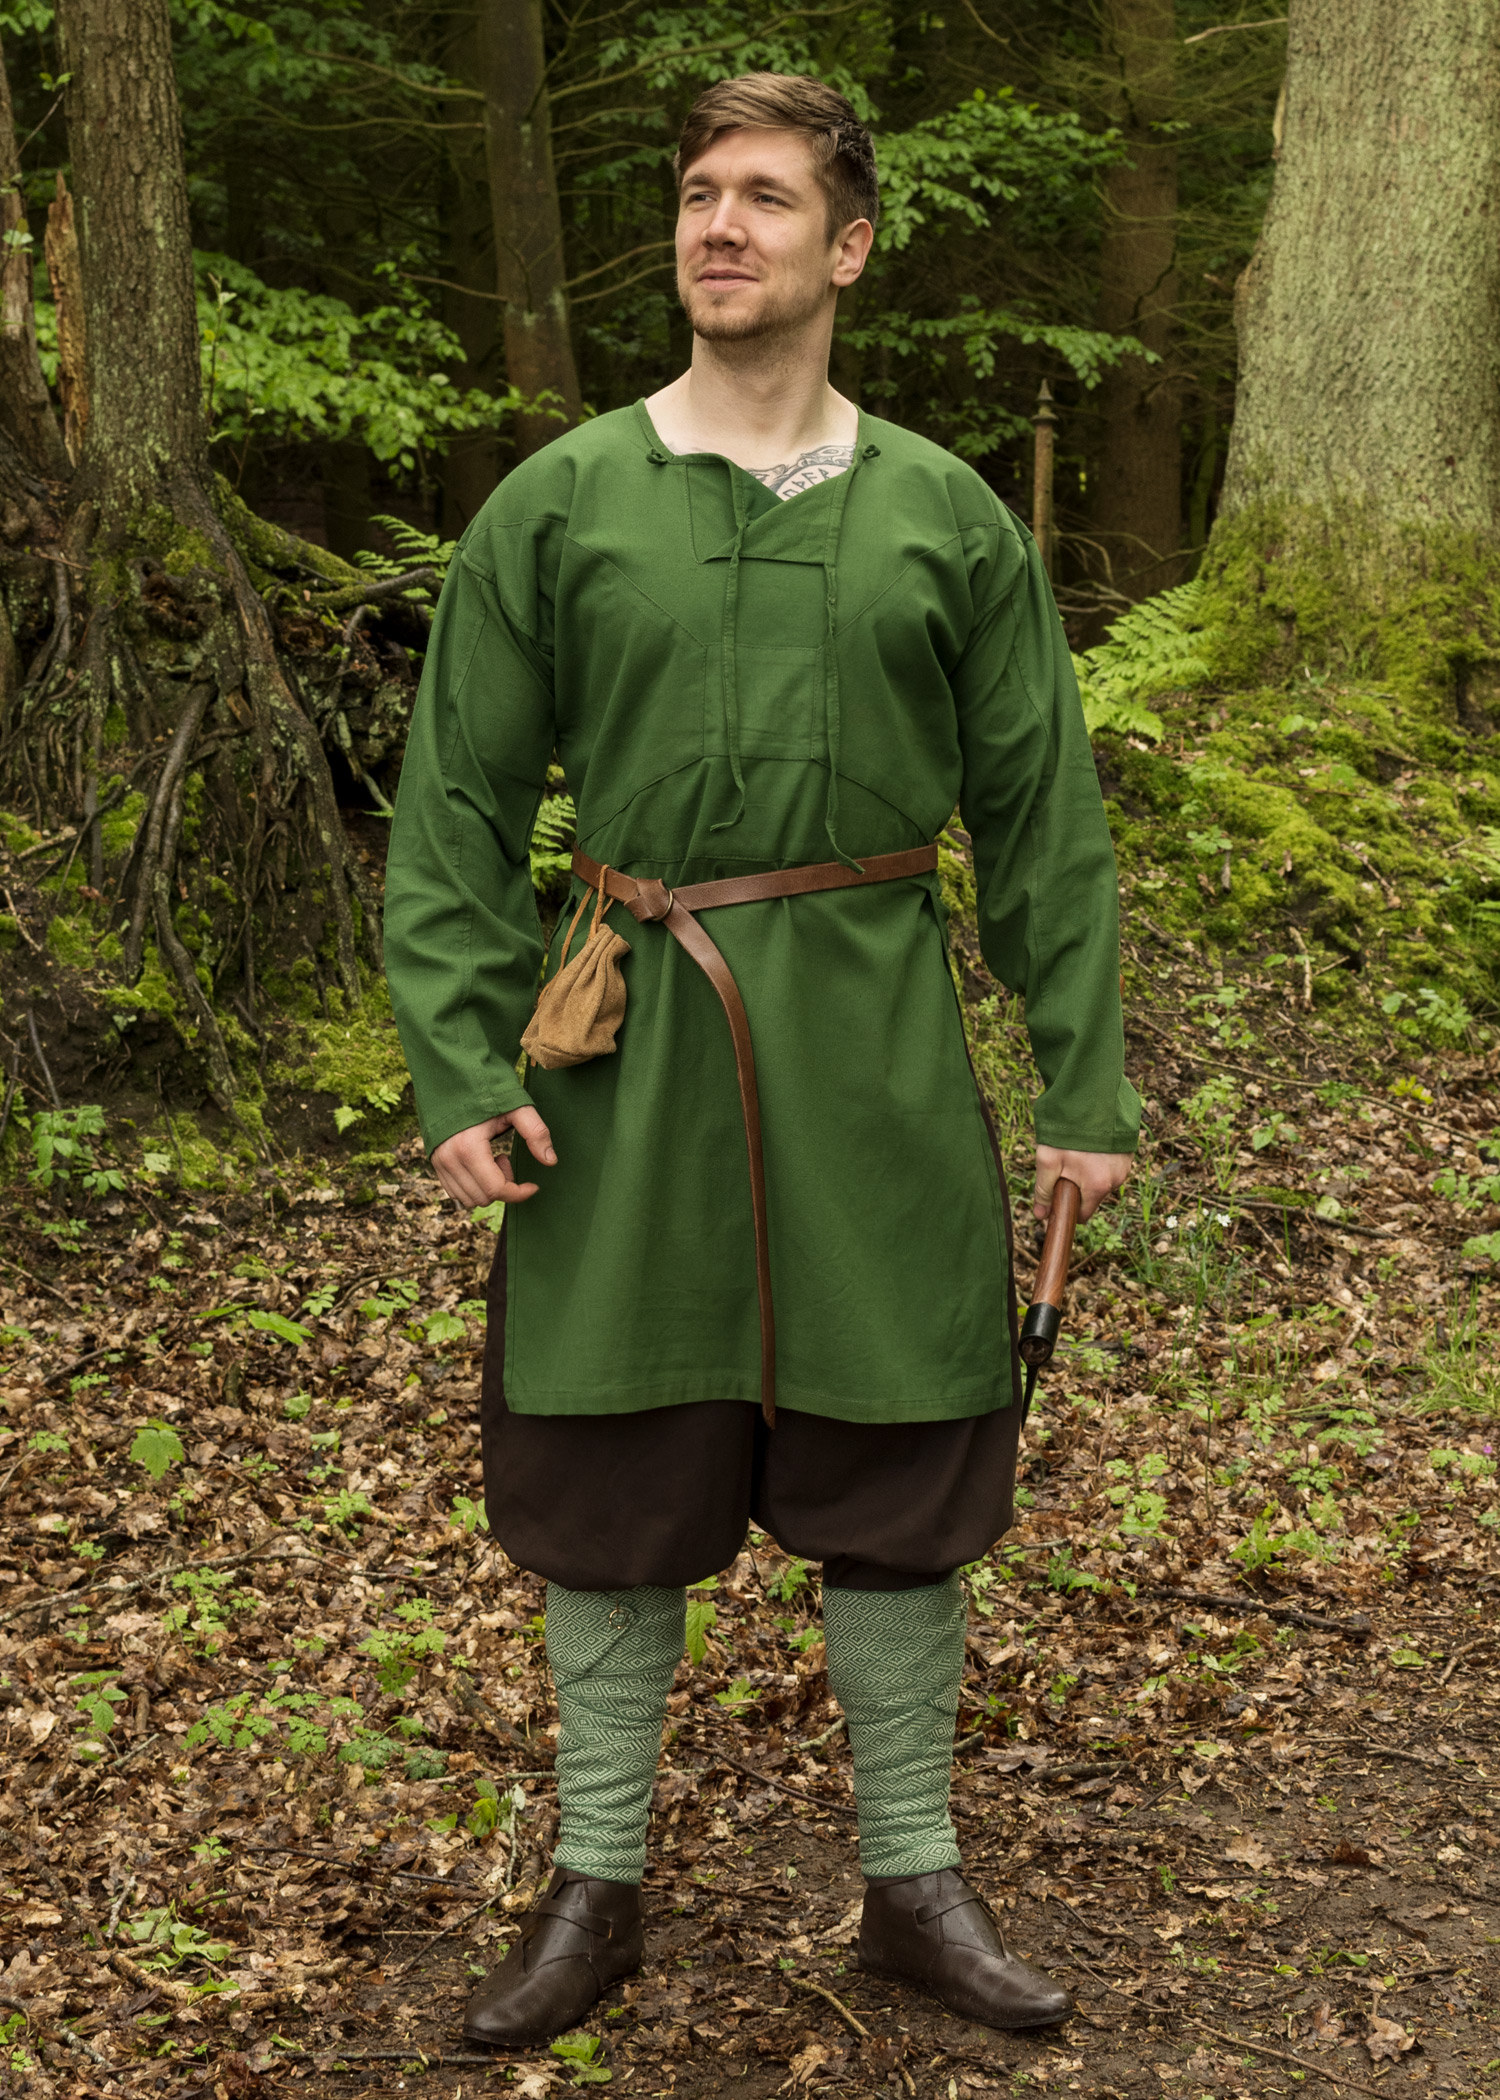 Viking Tunic, Viborg Reconstruction, green, Early Medieval Tunic, Vikings,  Middle Ages, Replica